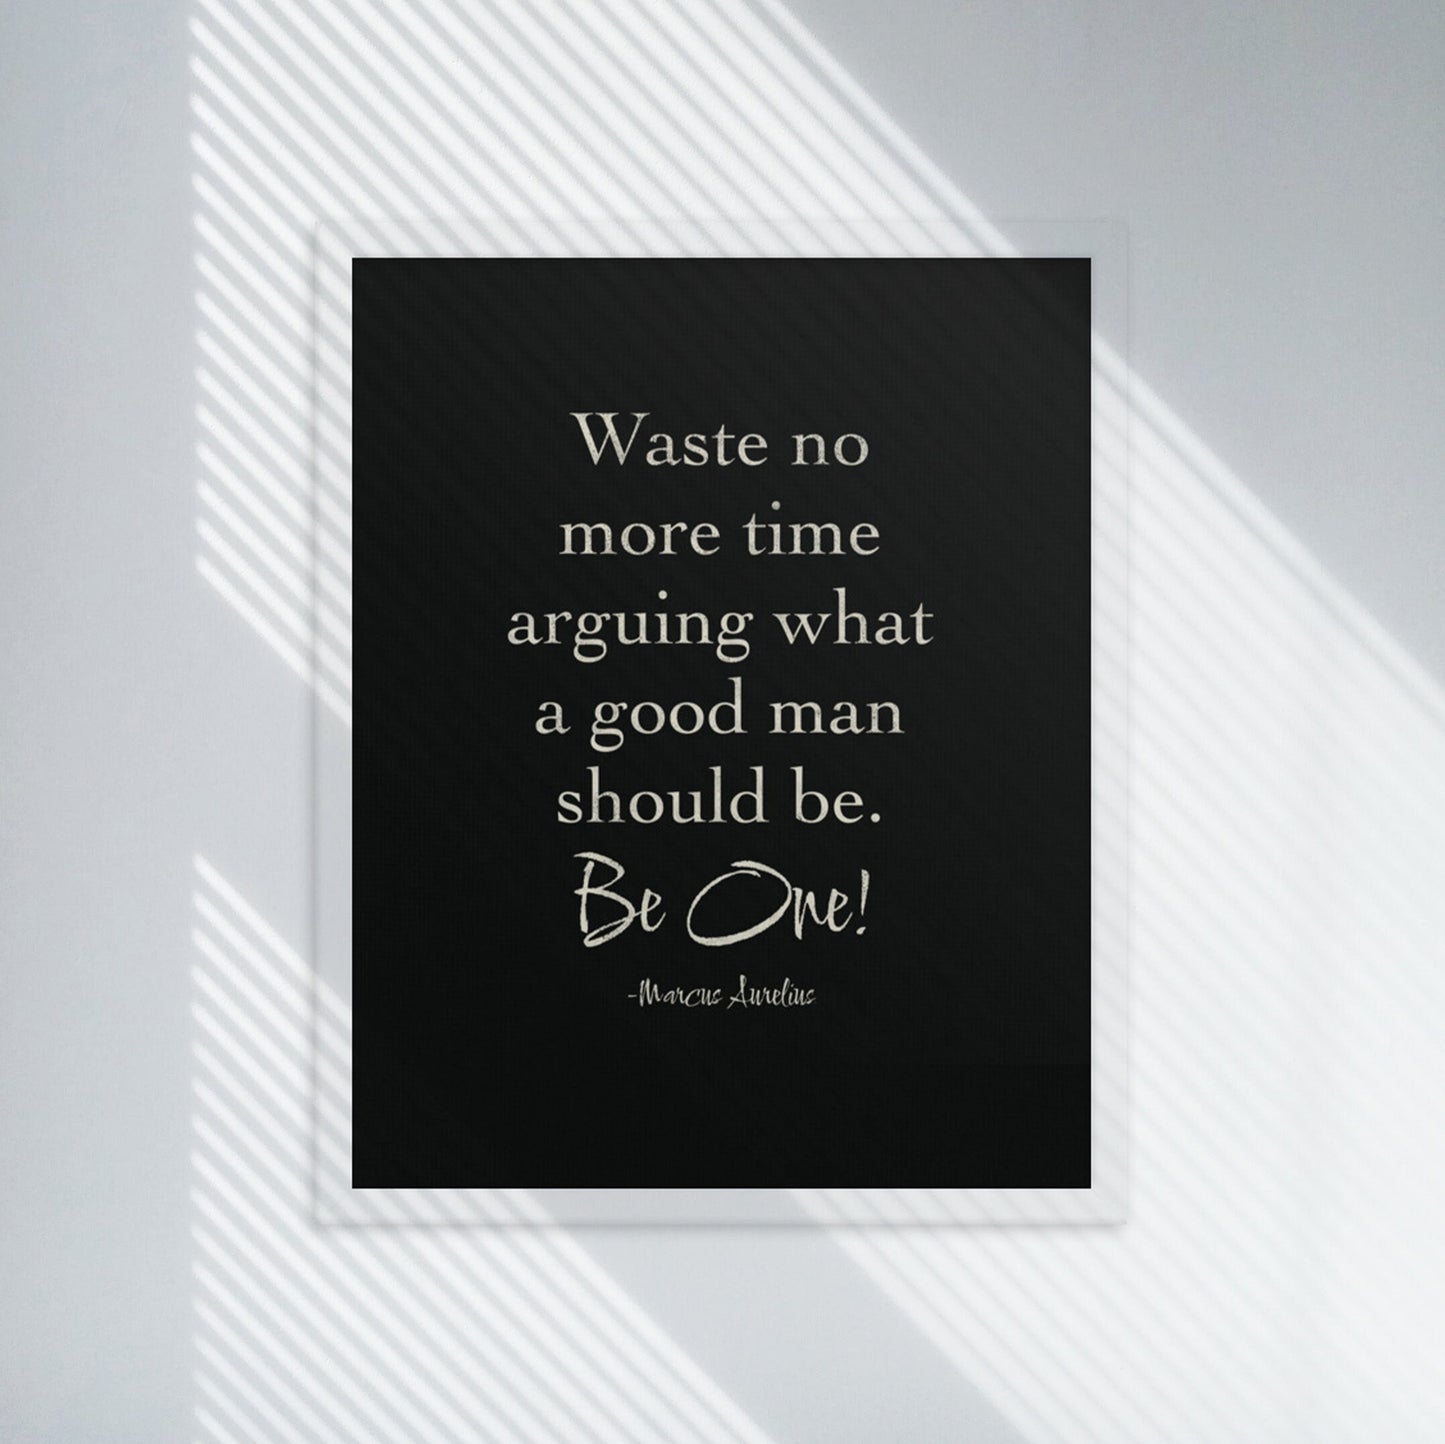 Waste no more time arguing what a good man should be.Be One! by Marcus Aurelius white on Black background white framed poster.